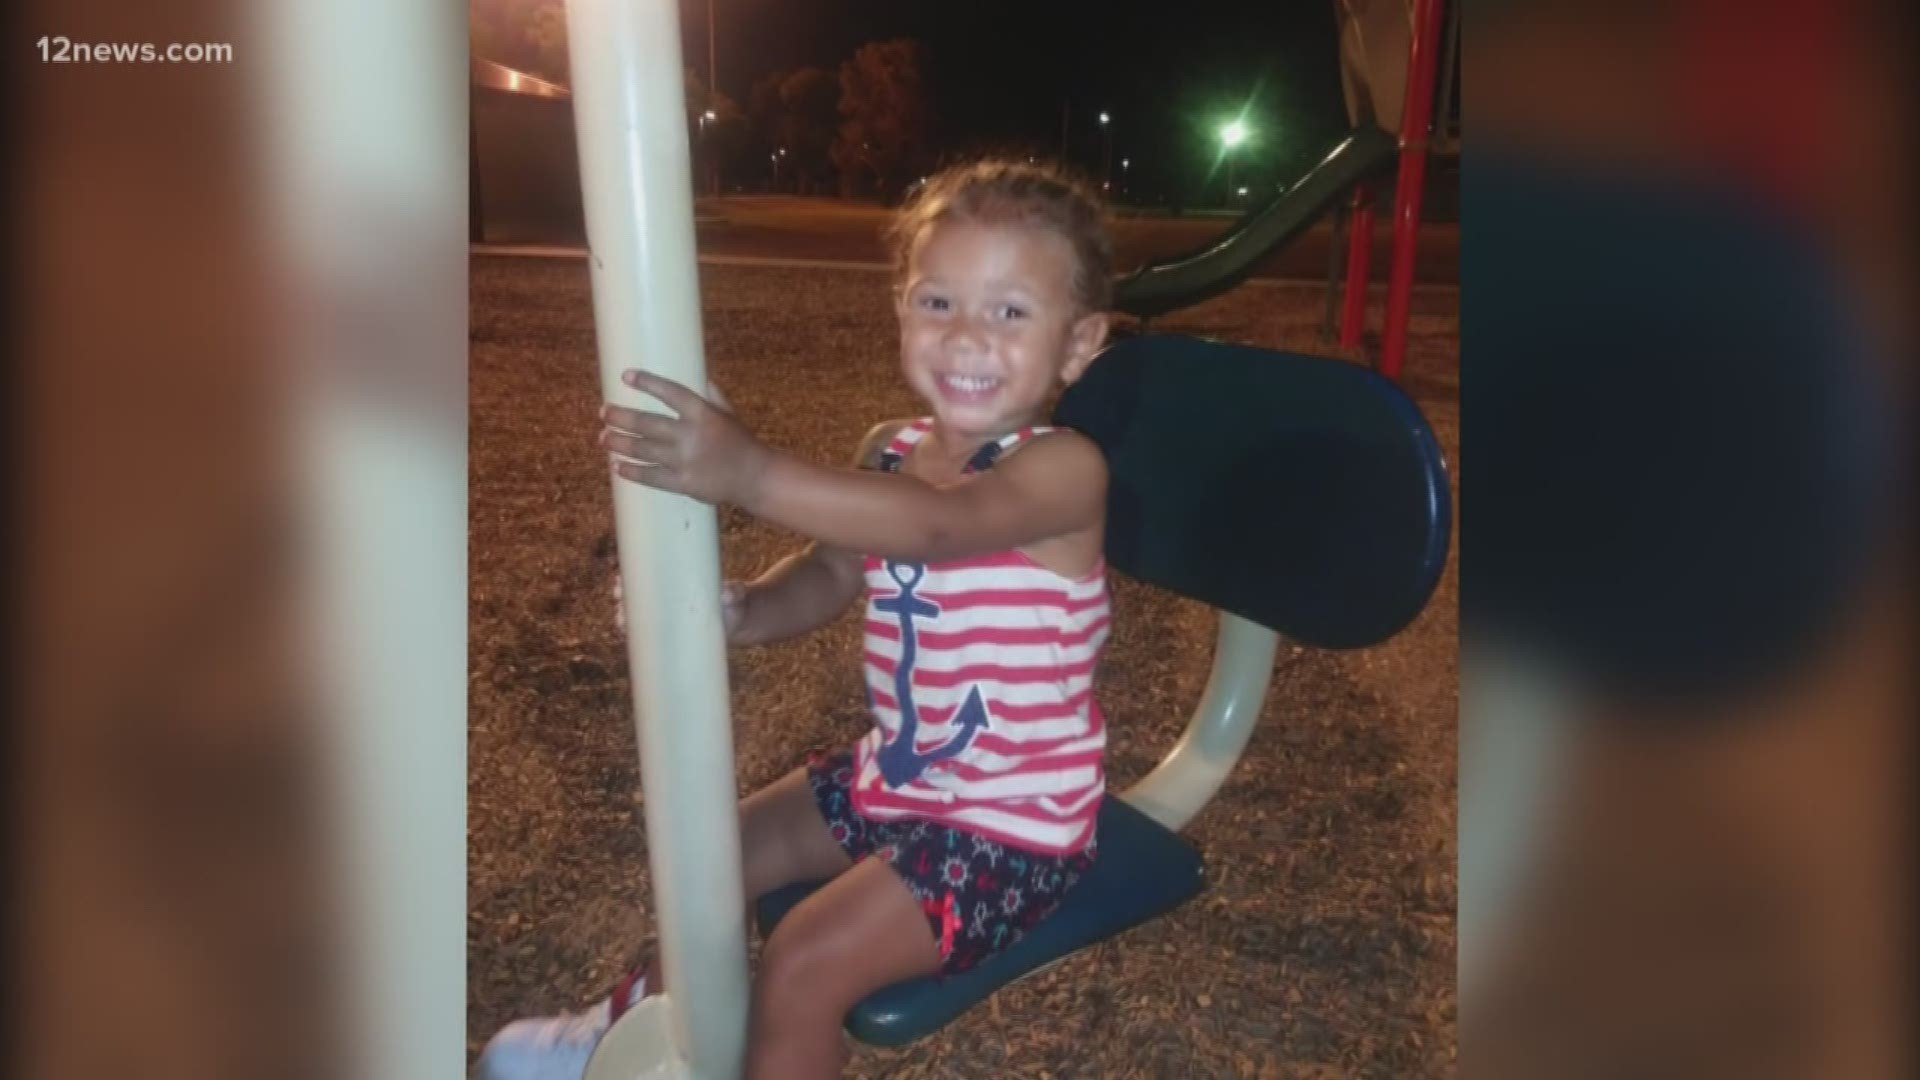 Parents entrusted two caregivers to watch this Phoenix 2-year-old, but what was claimed a fall resulted in her death.